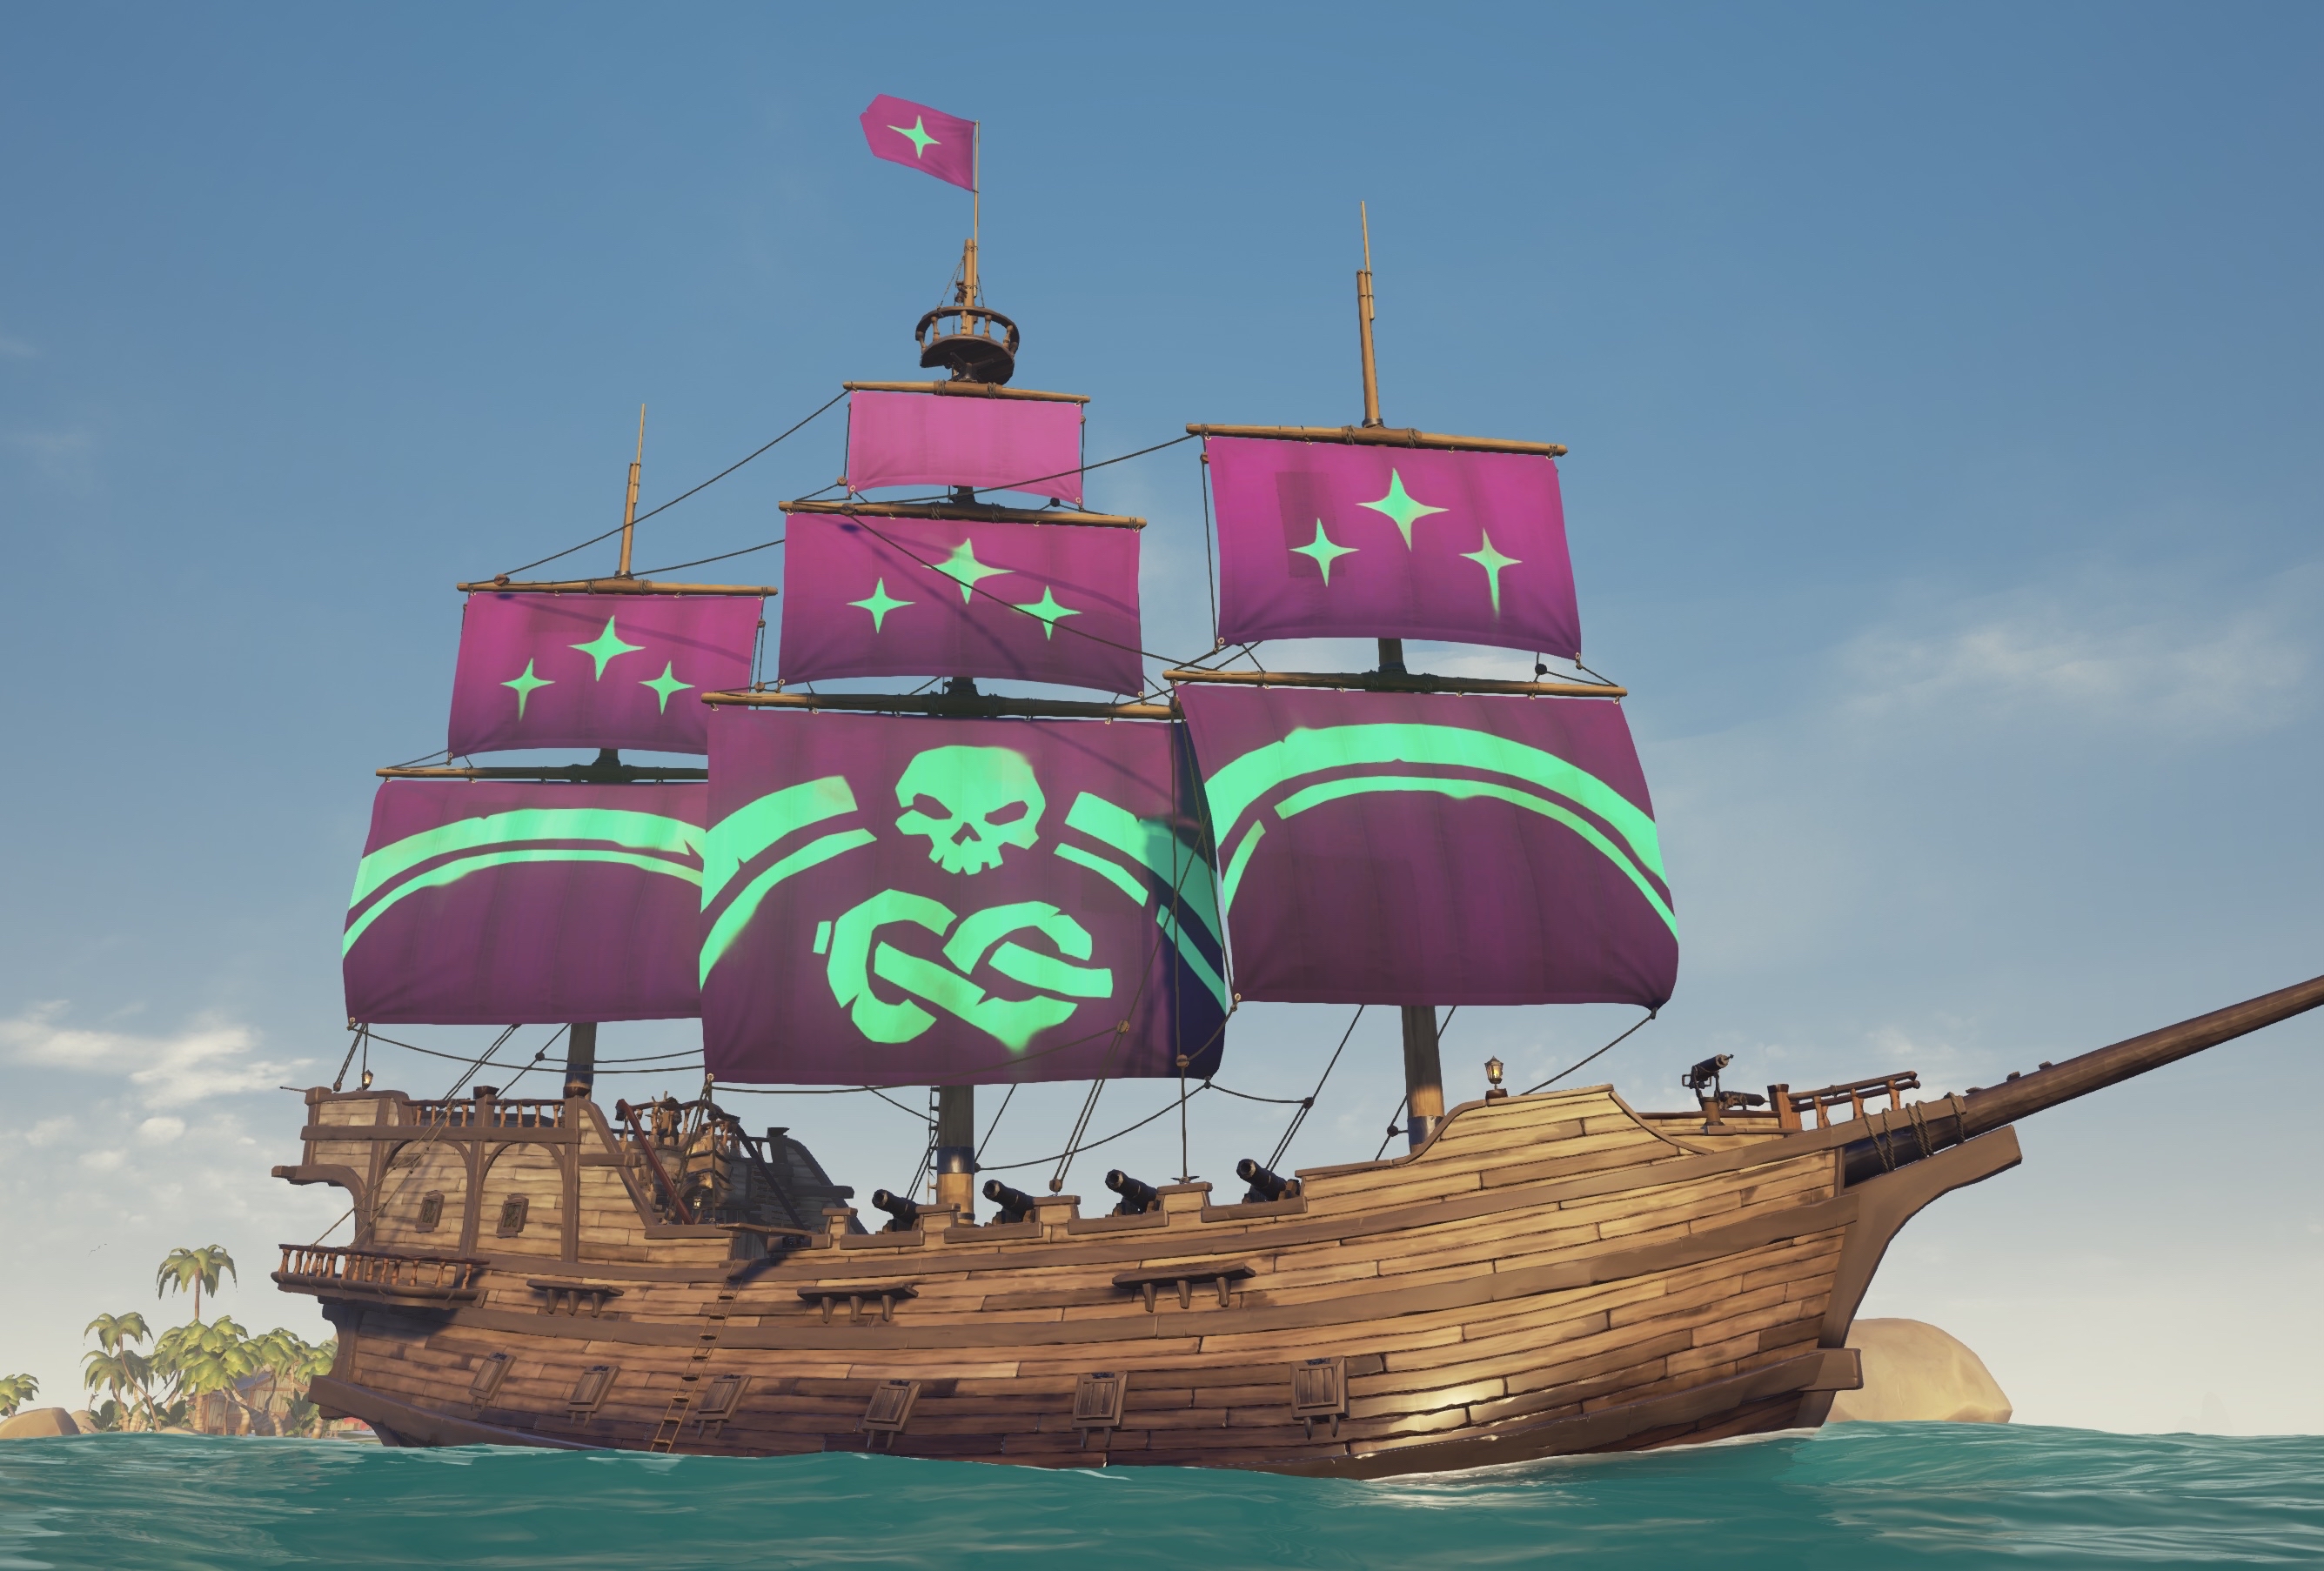 sea of thieves alliance